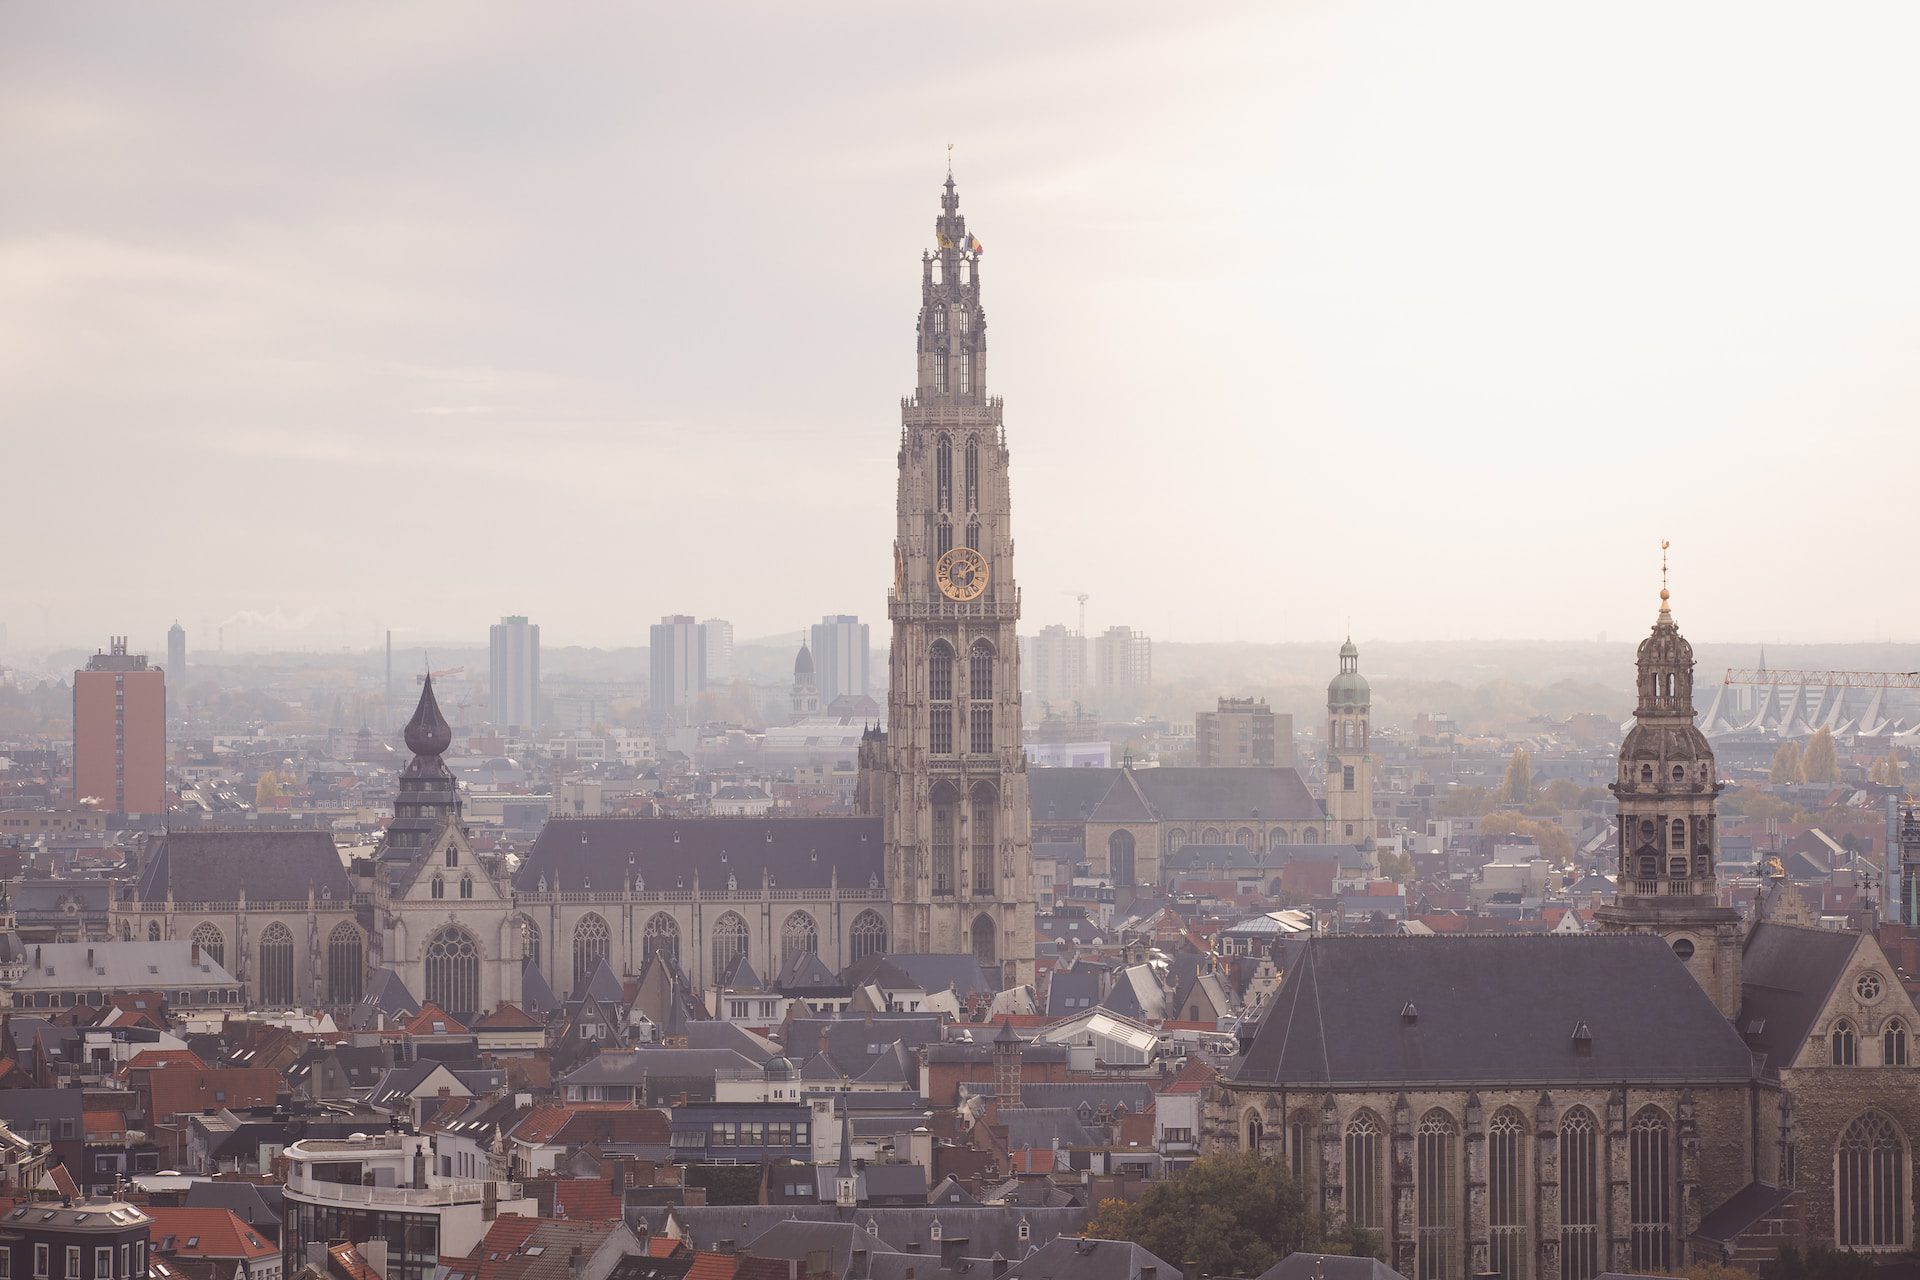 A view of Antwerp city with the Cathedral of Our Lady Church in centre